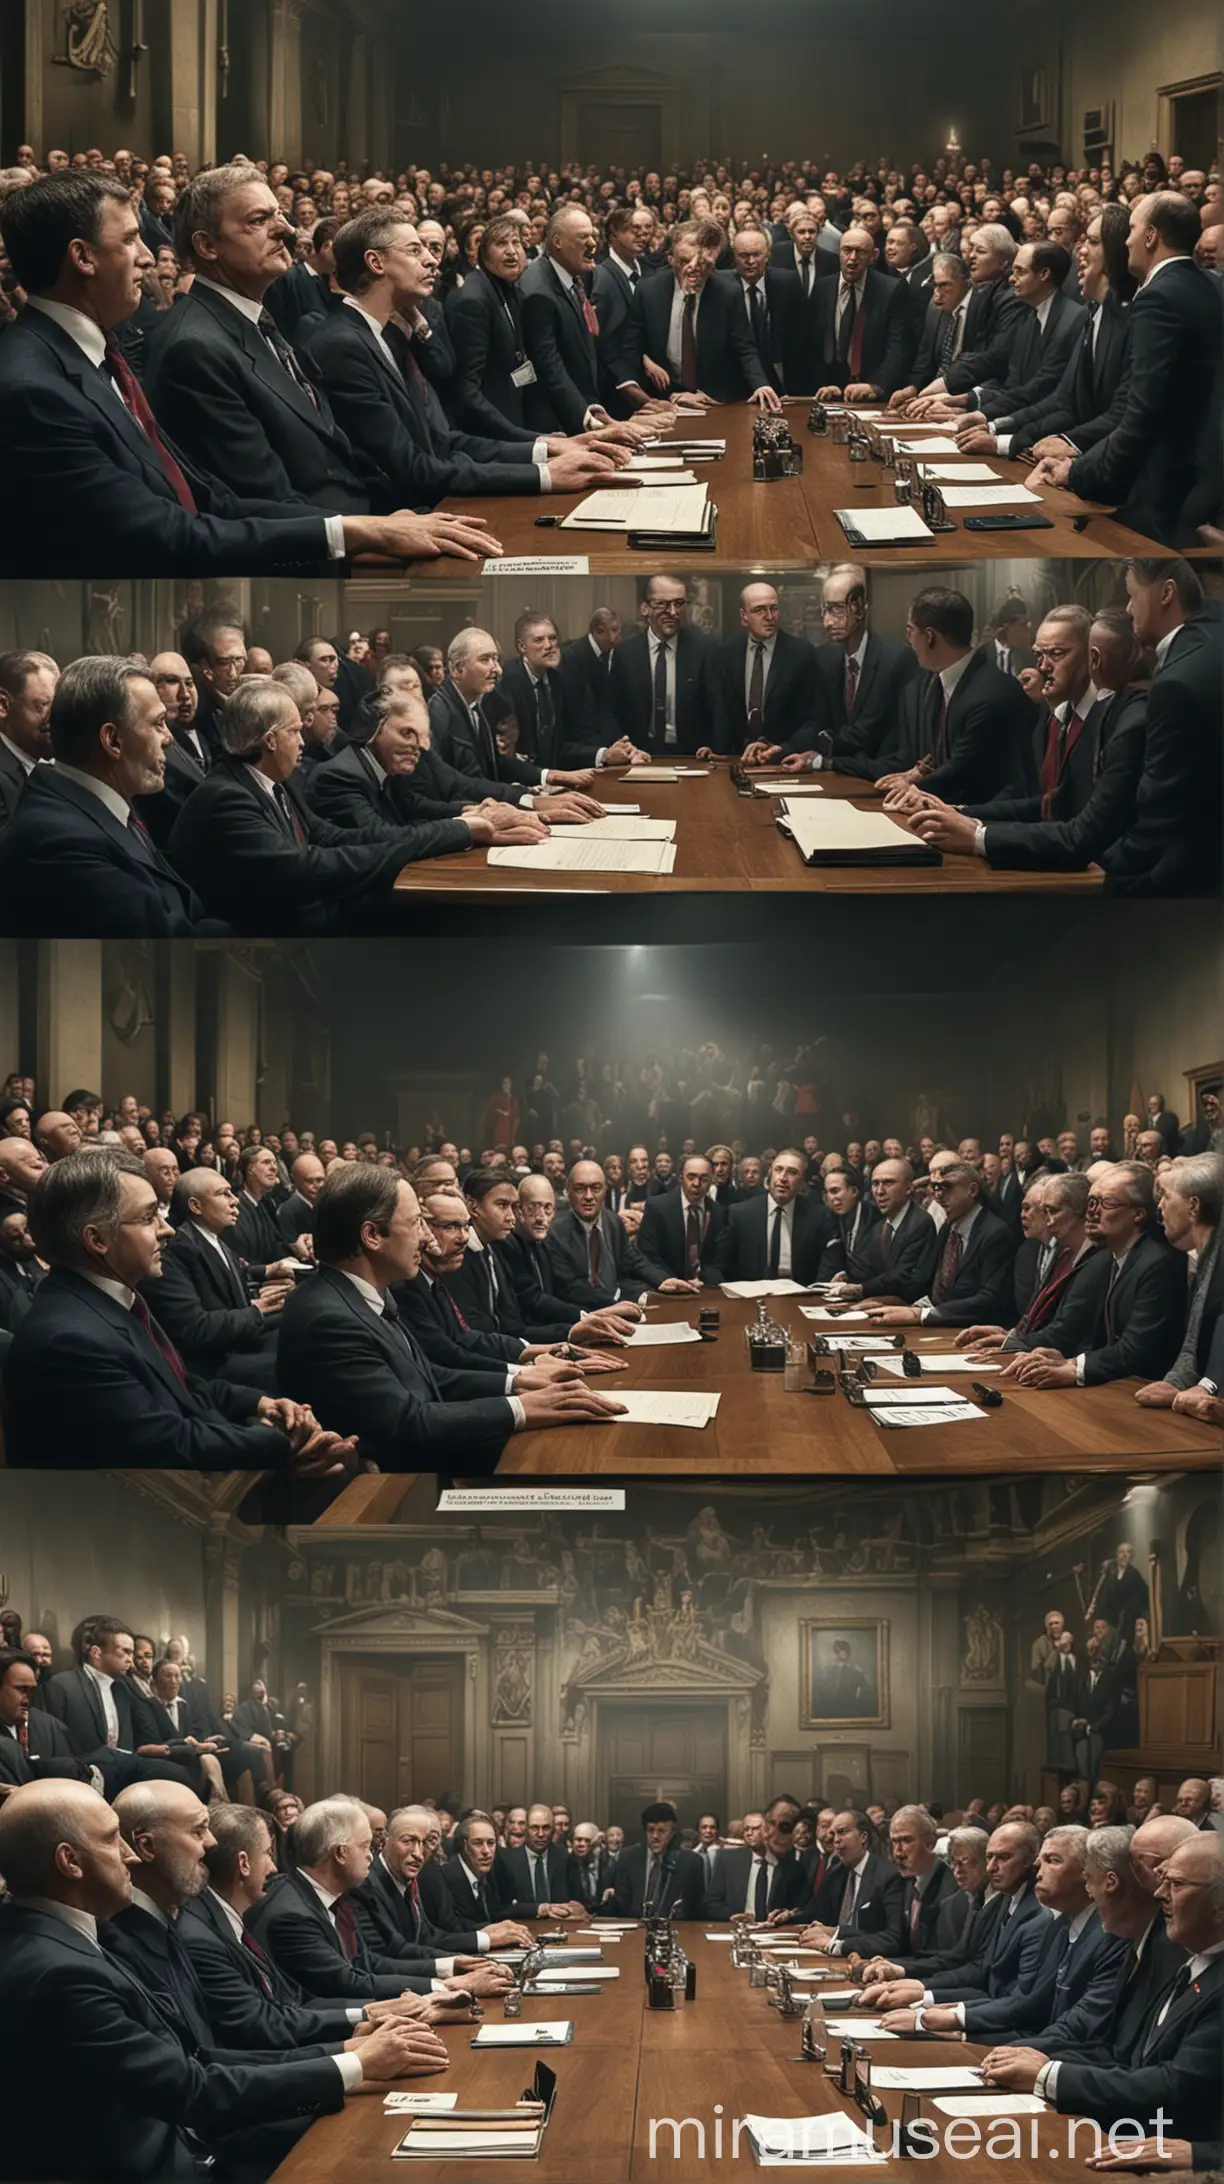 A split-screen image showing conflicting opinions within the British government, with some officials nodding in agreement while others shake their heads in dissent. hyper realistic